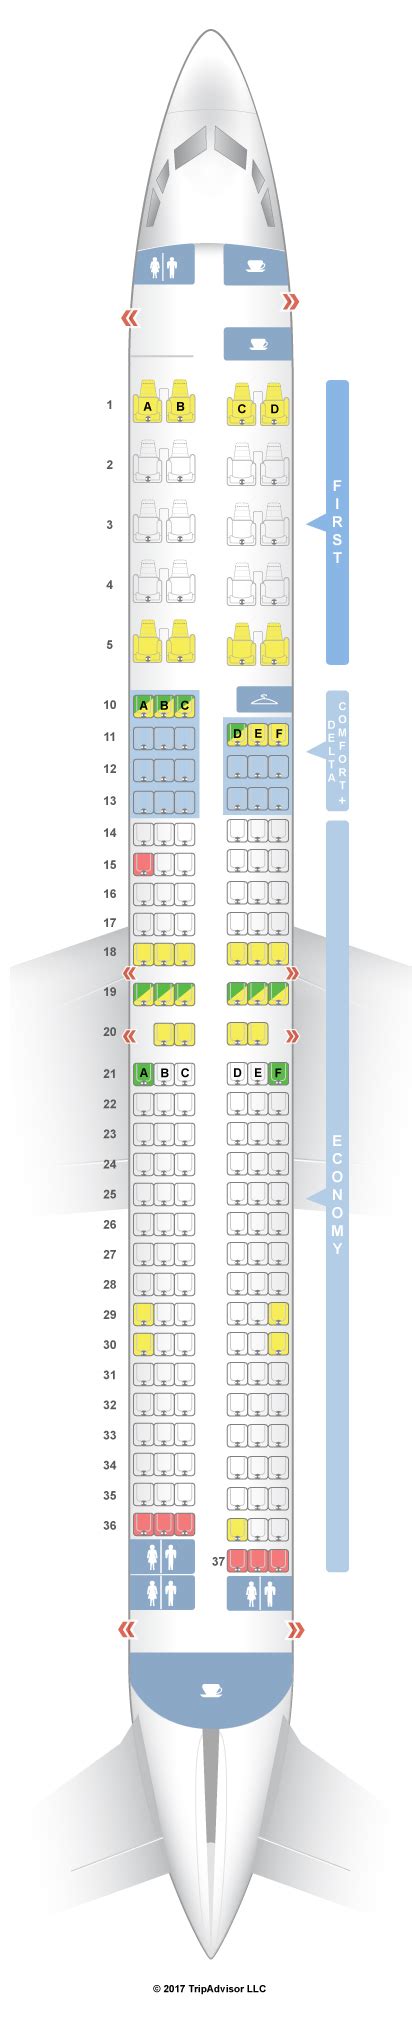 For your next Alaska Airlines flight, use this seating chart to get the most comfortable seats, legroom, and recline on .. 